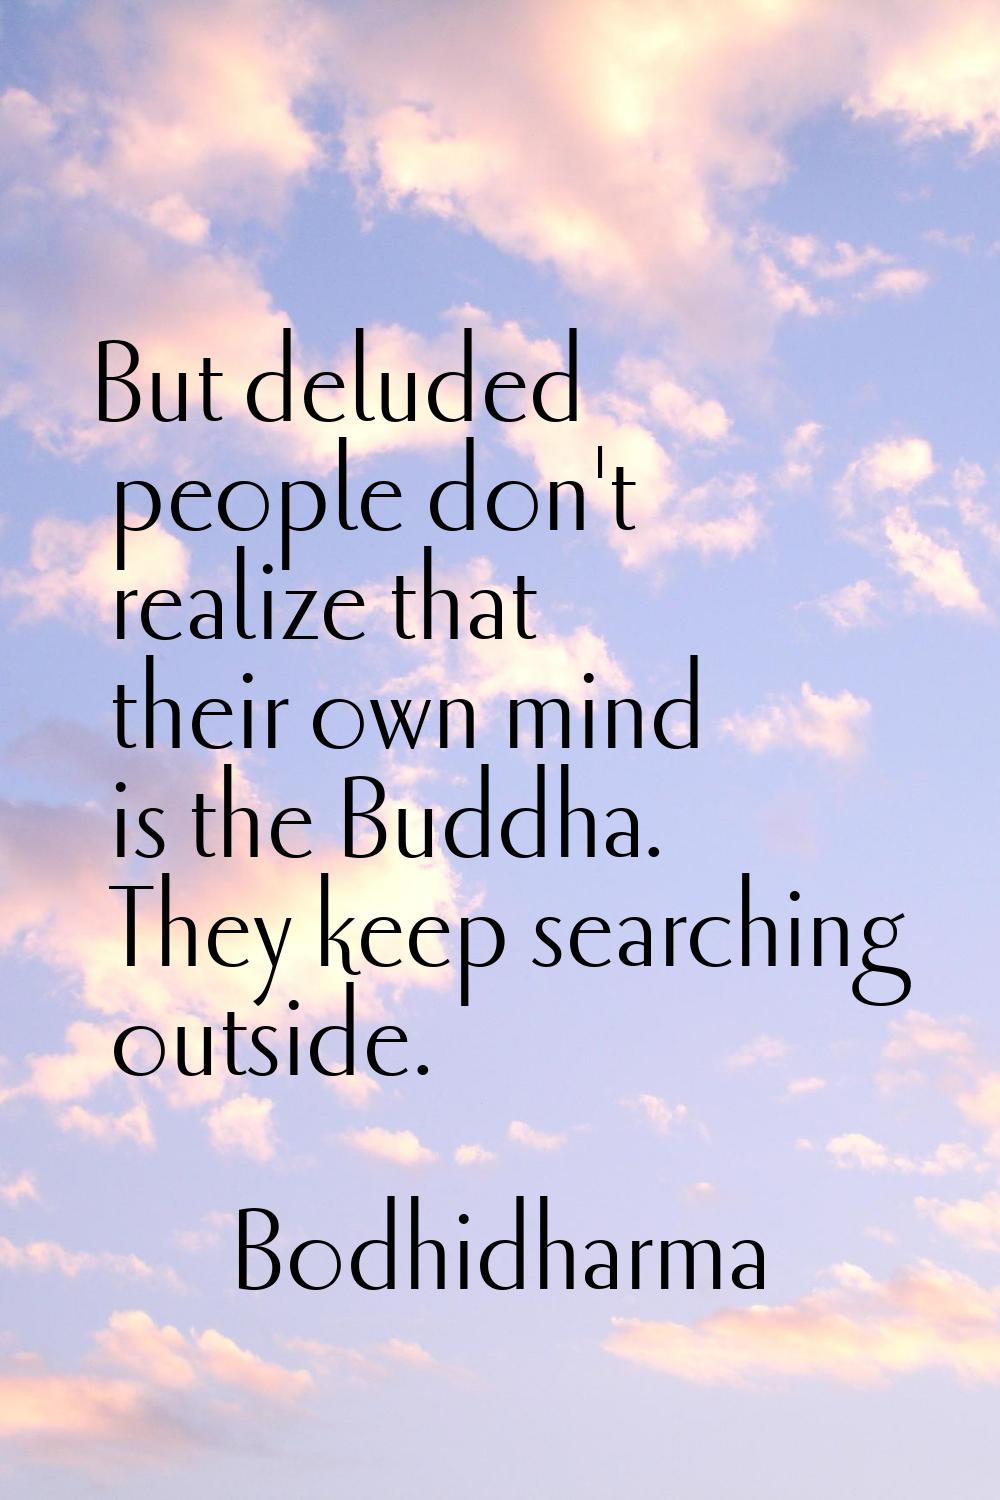 But deluded people don't realize that their own mind is the Buddha. They keep searching outside.